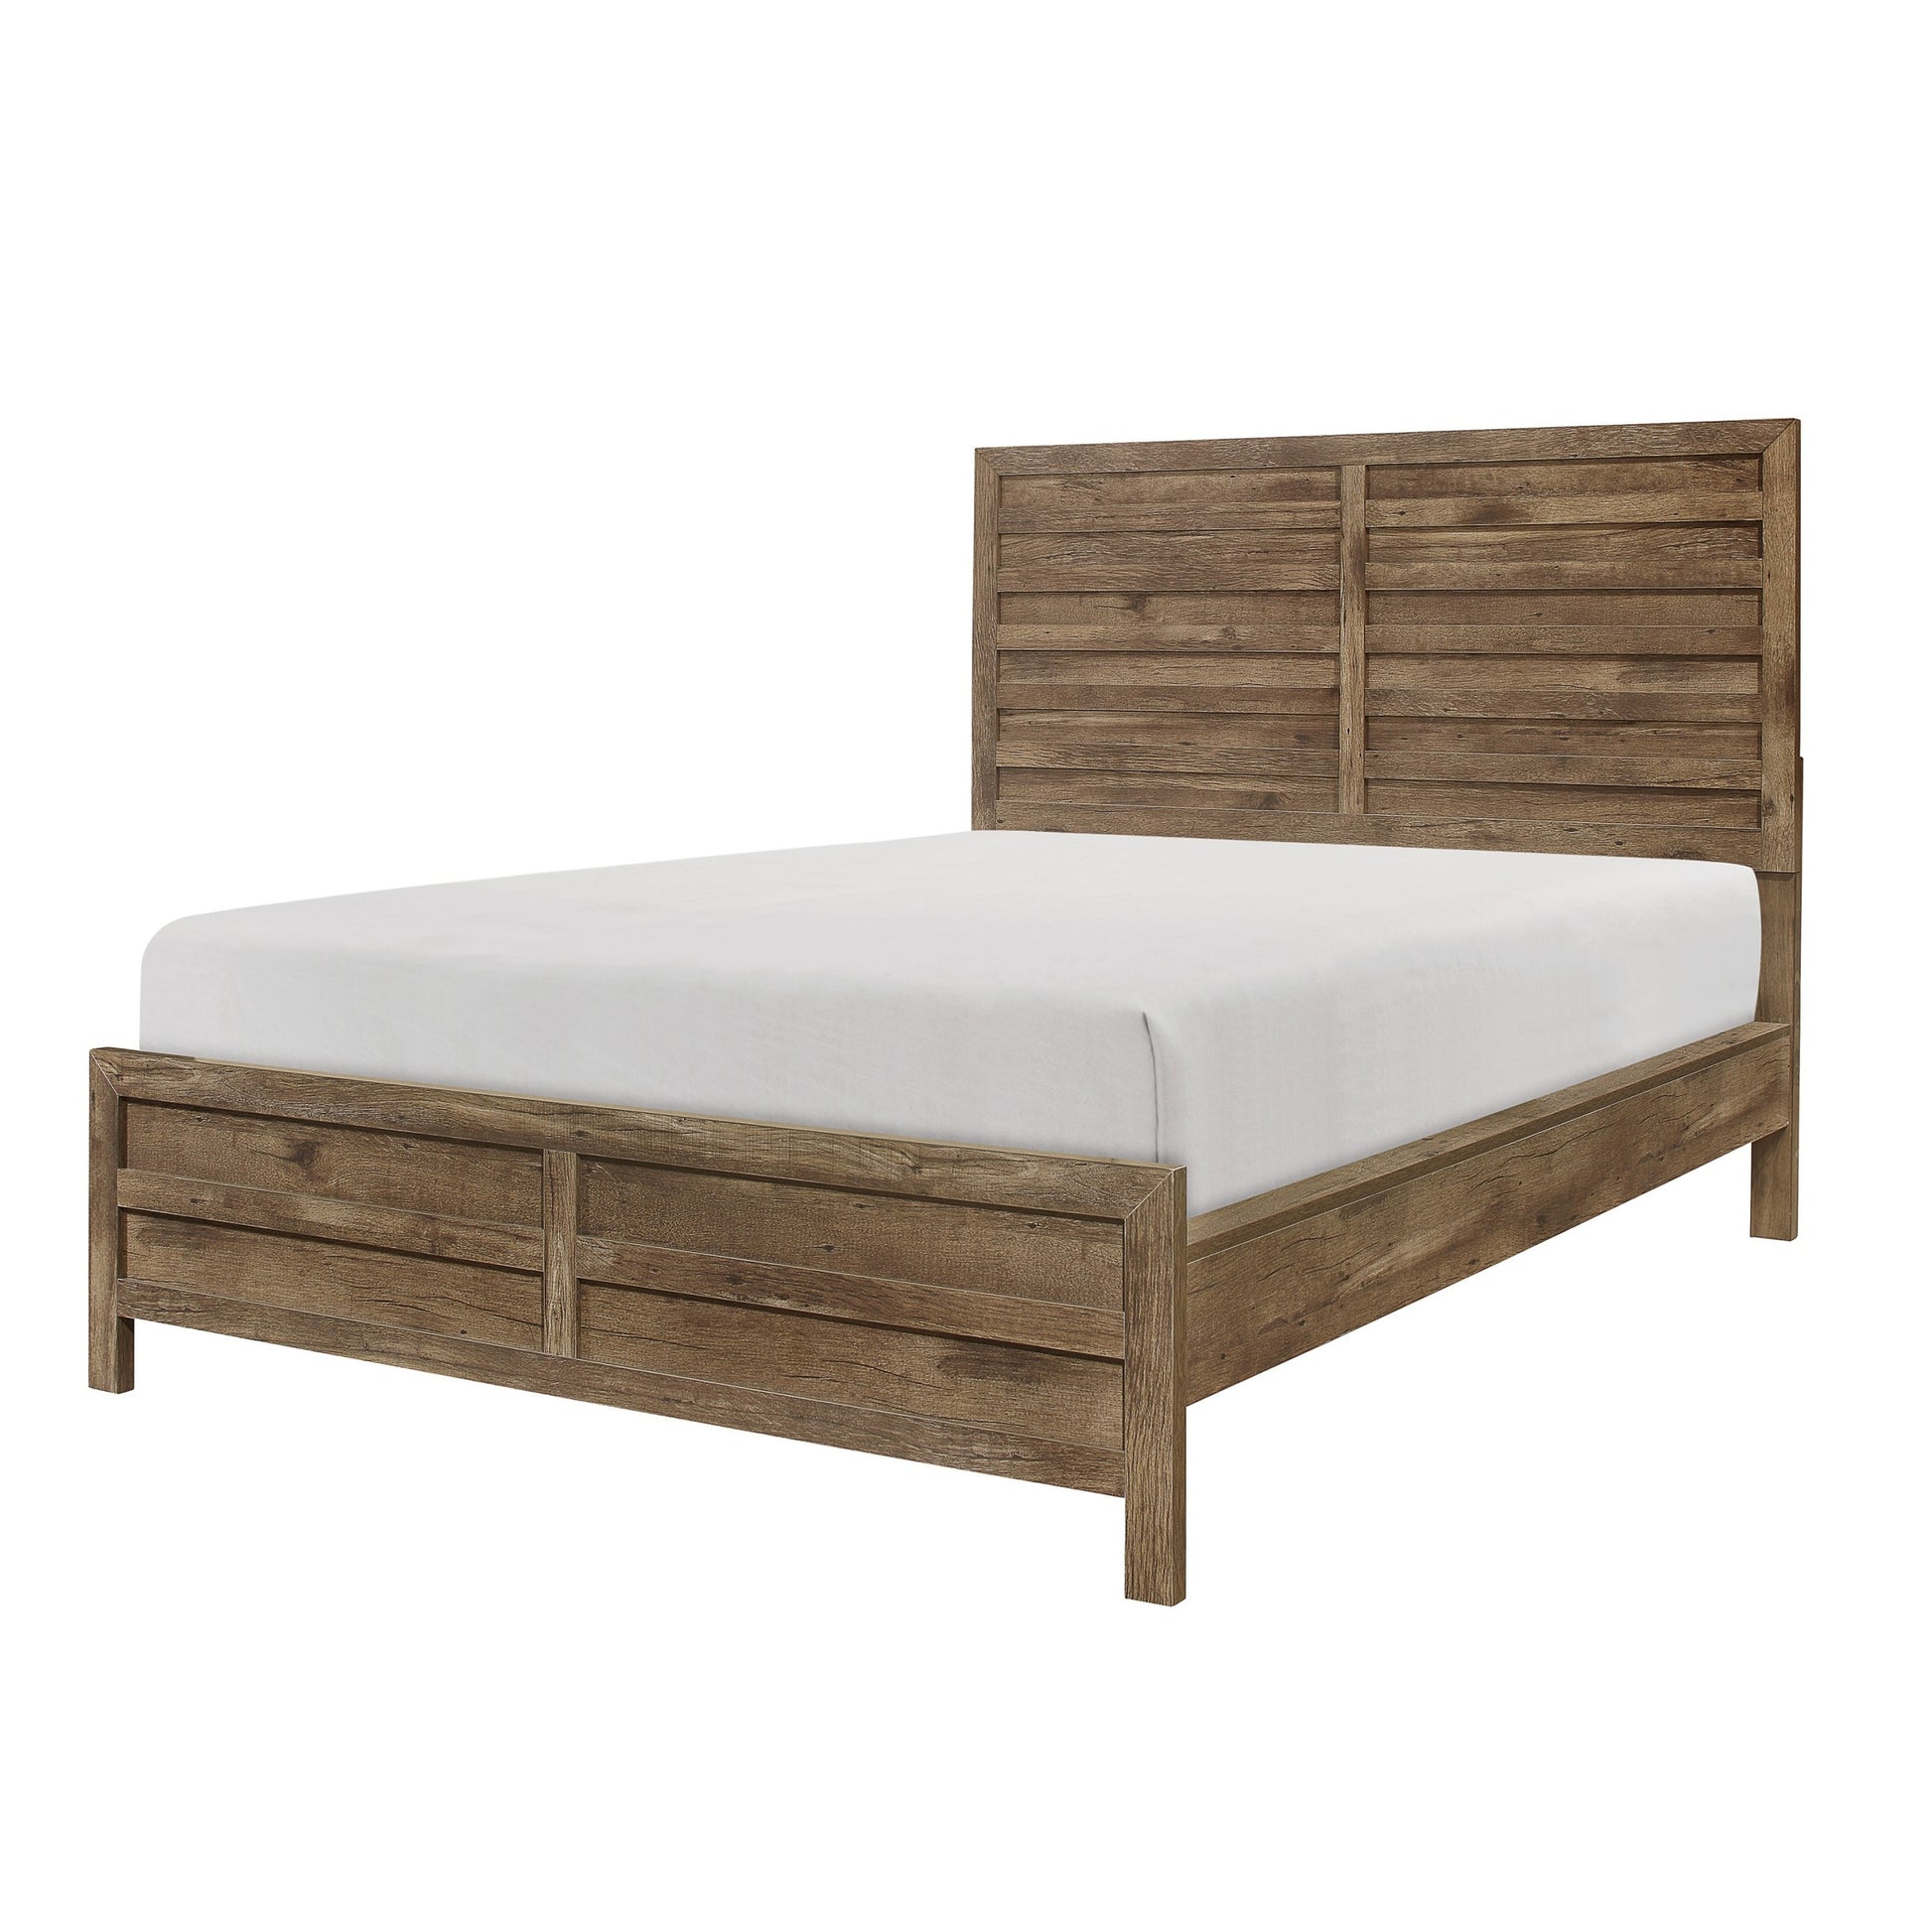 Weathered Pine Finish 1pc Queen Bed Modern Line box spring required-queen-brown